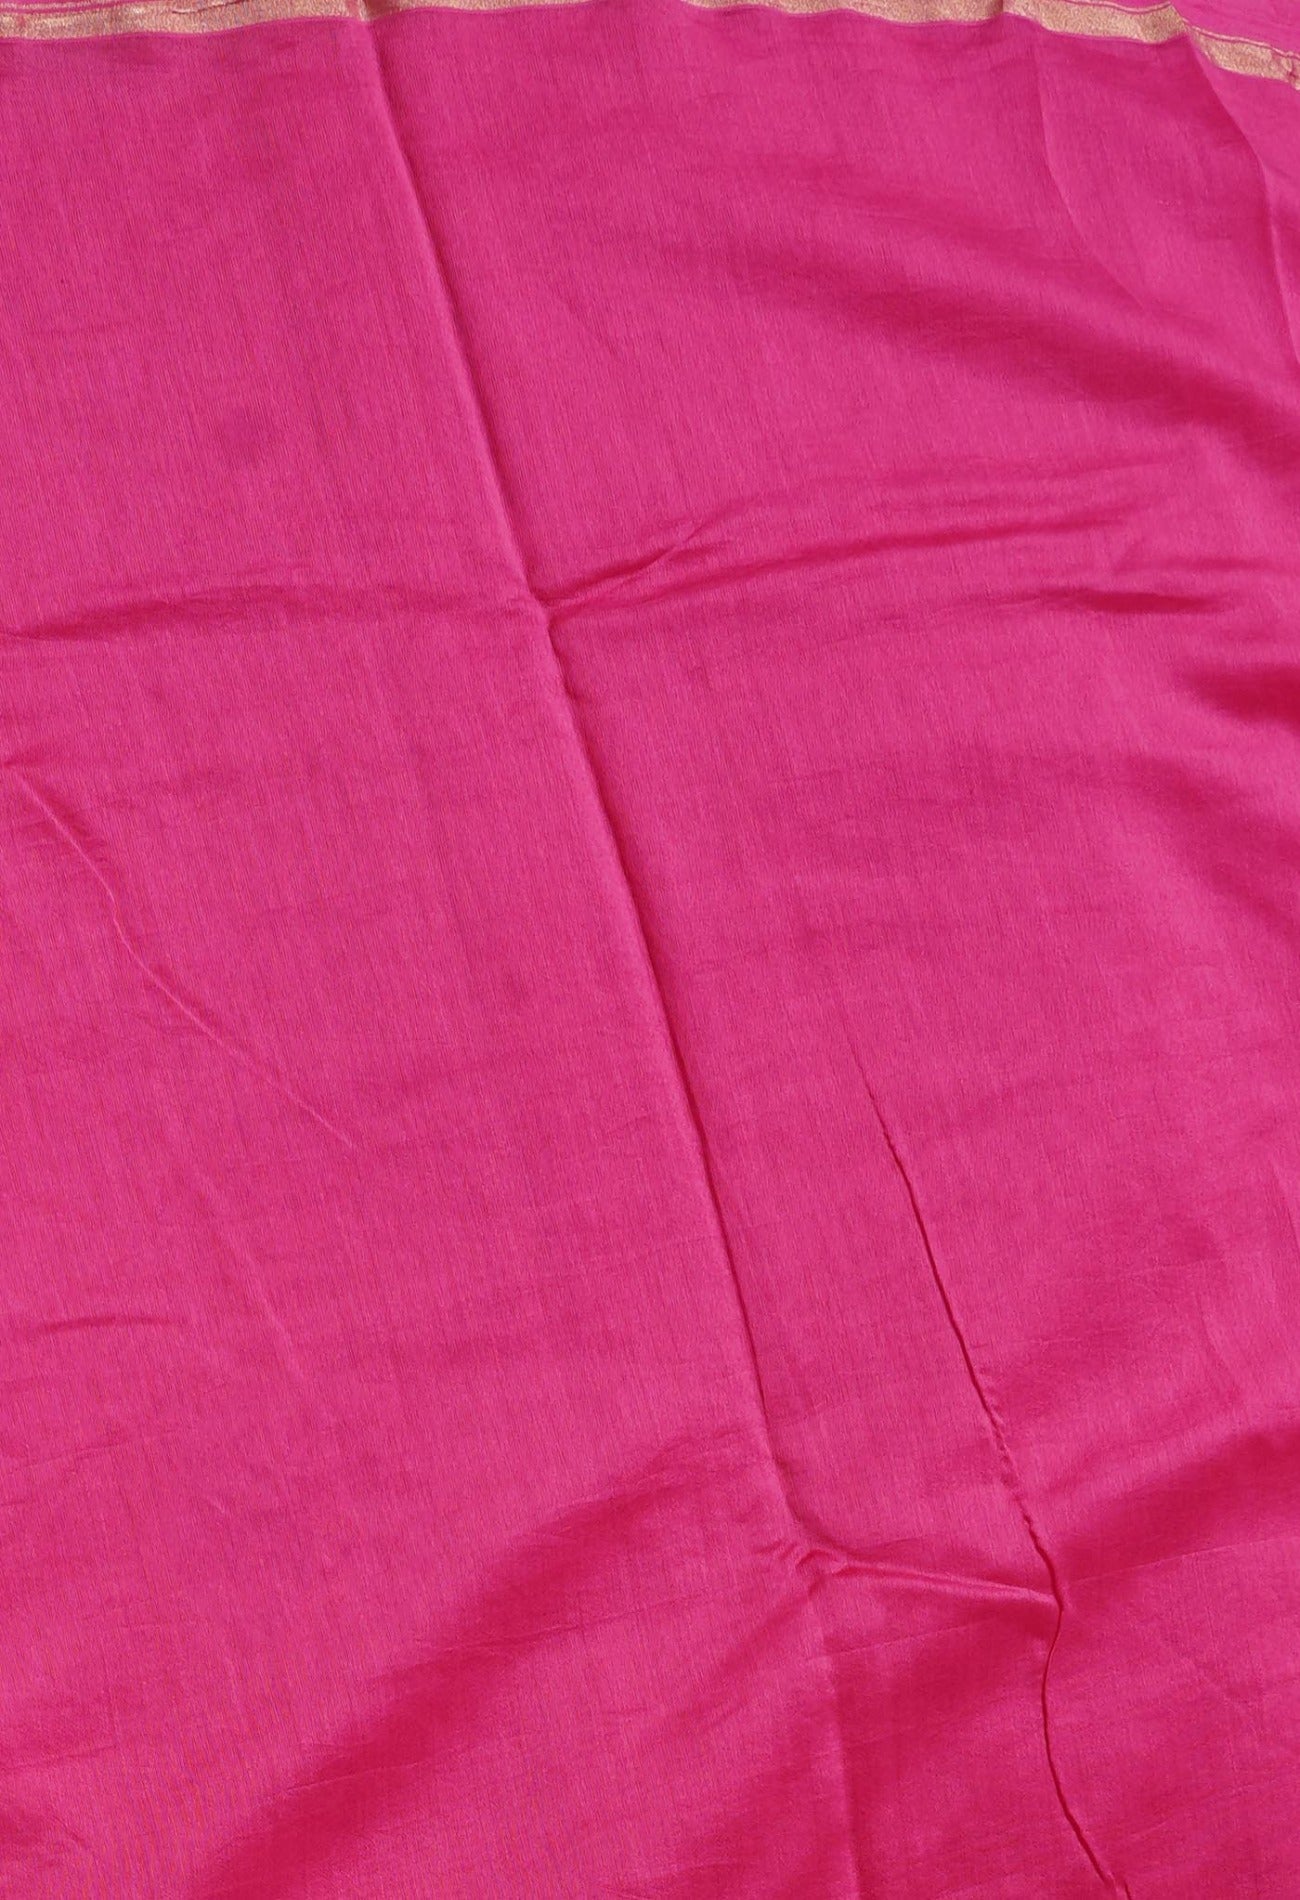 Online Shopping for Pink Pure Chanderi Sico Saree with Weaving from Madhya Pradesh at Unnatisilks.com India
